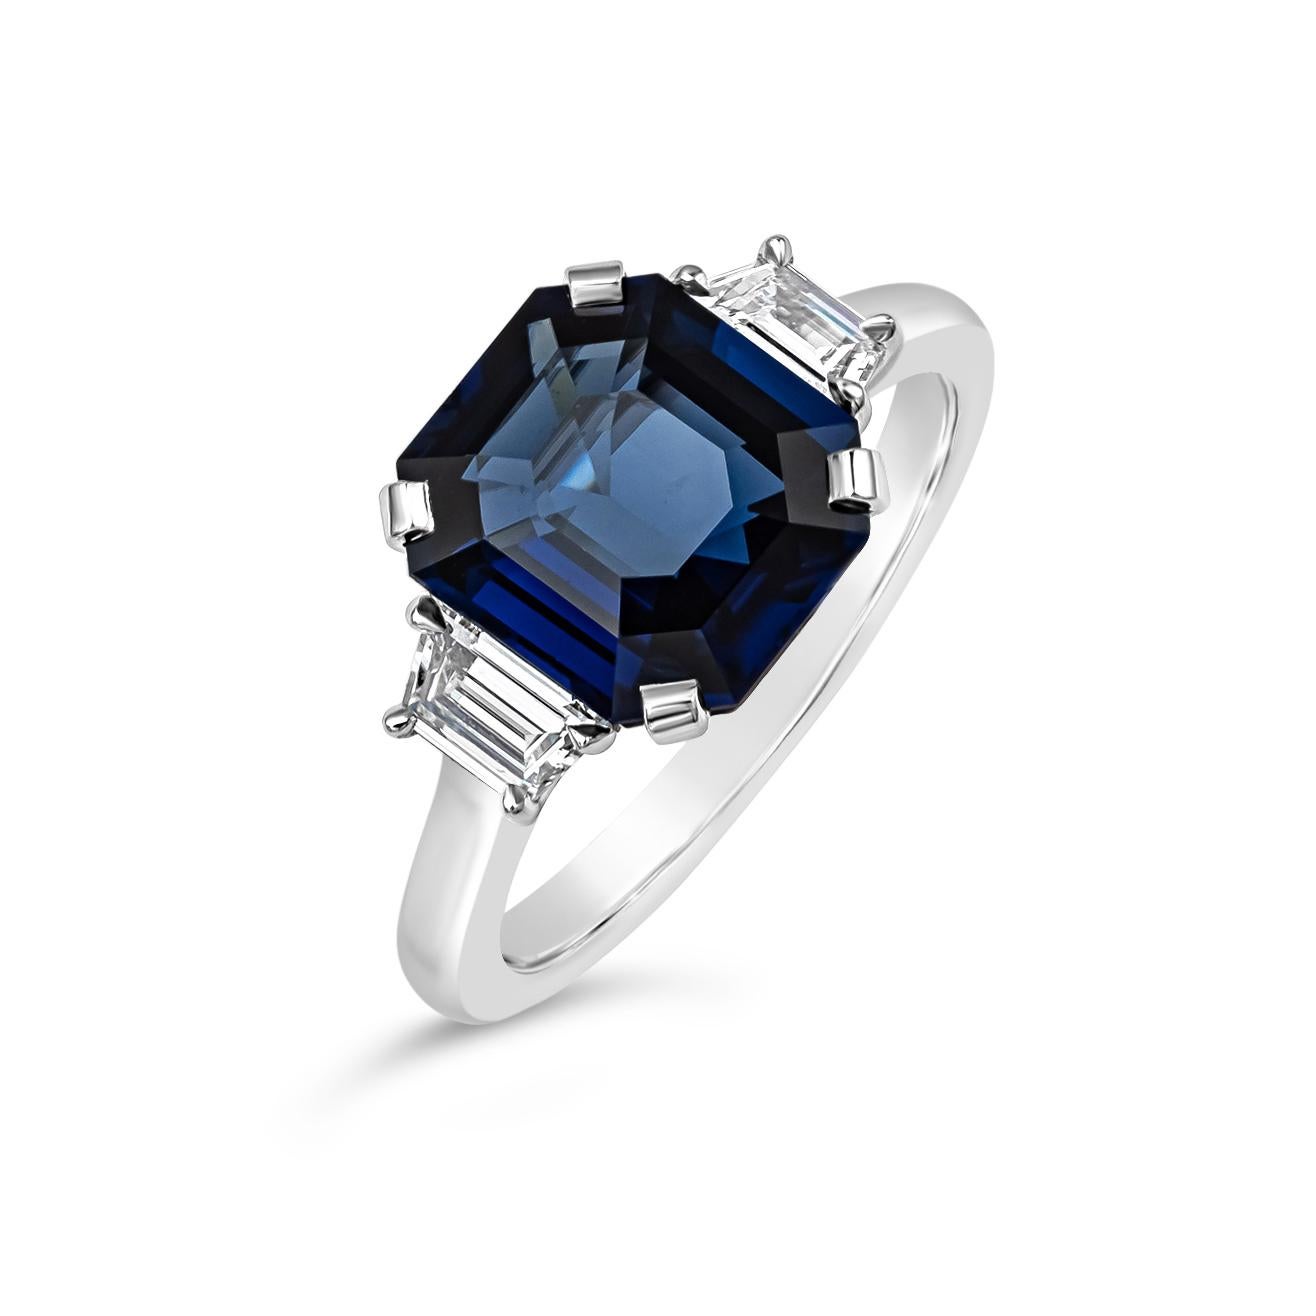 A classic and timeless engagement ring showcasing a 3.73 carats emerald cut blue sapphire, flanked by two step-cut trapezoid diamonds on either side. Diamonds weigh 0.40 carats total and are approximately F color, VS clarity. Center sapphire is